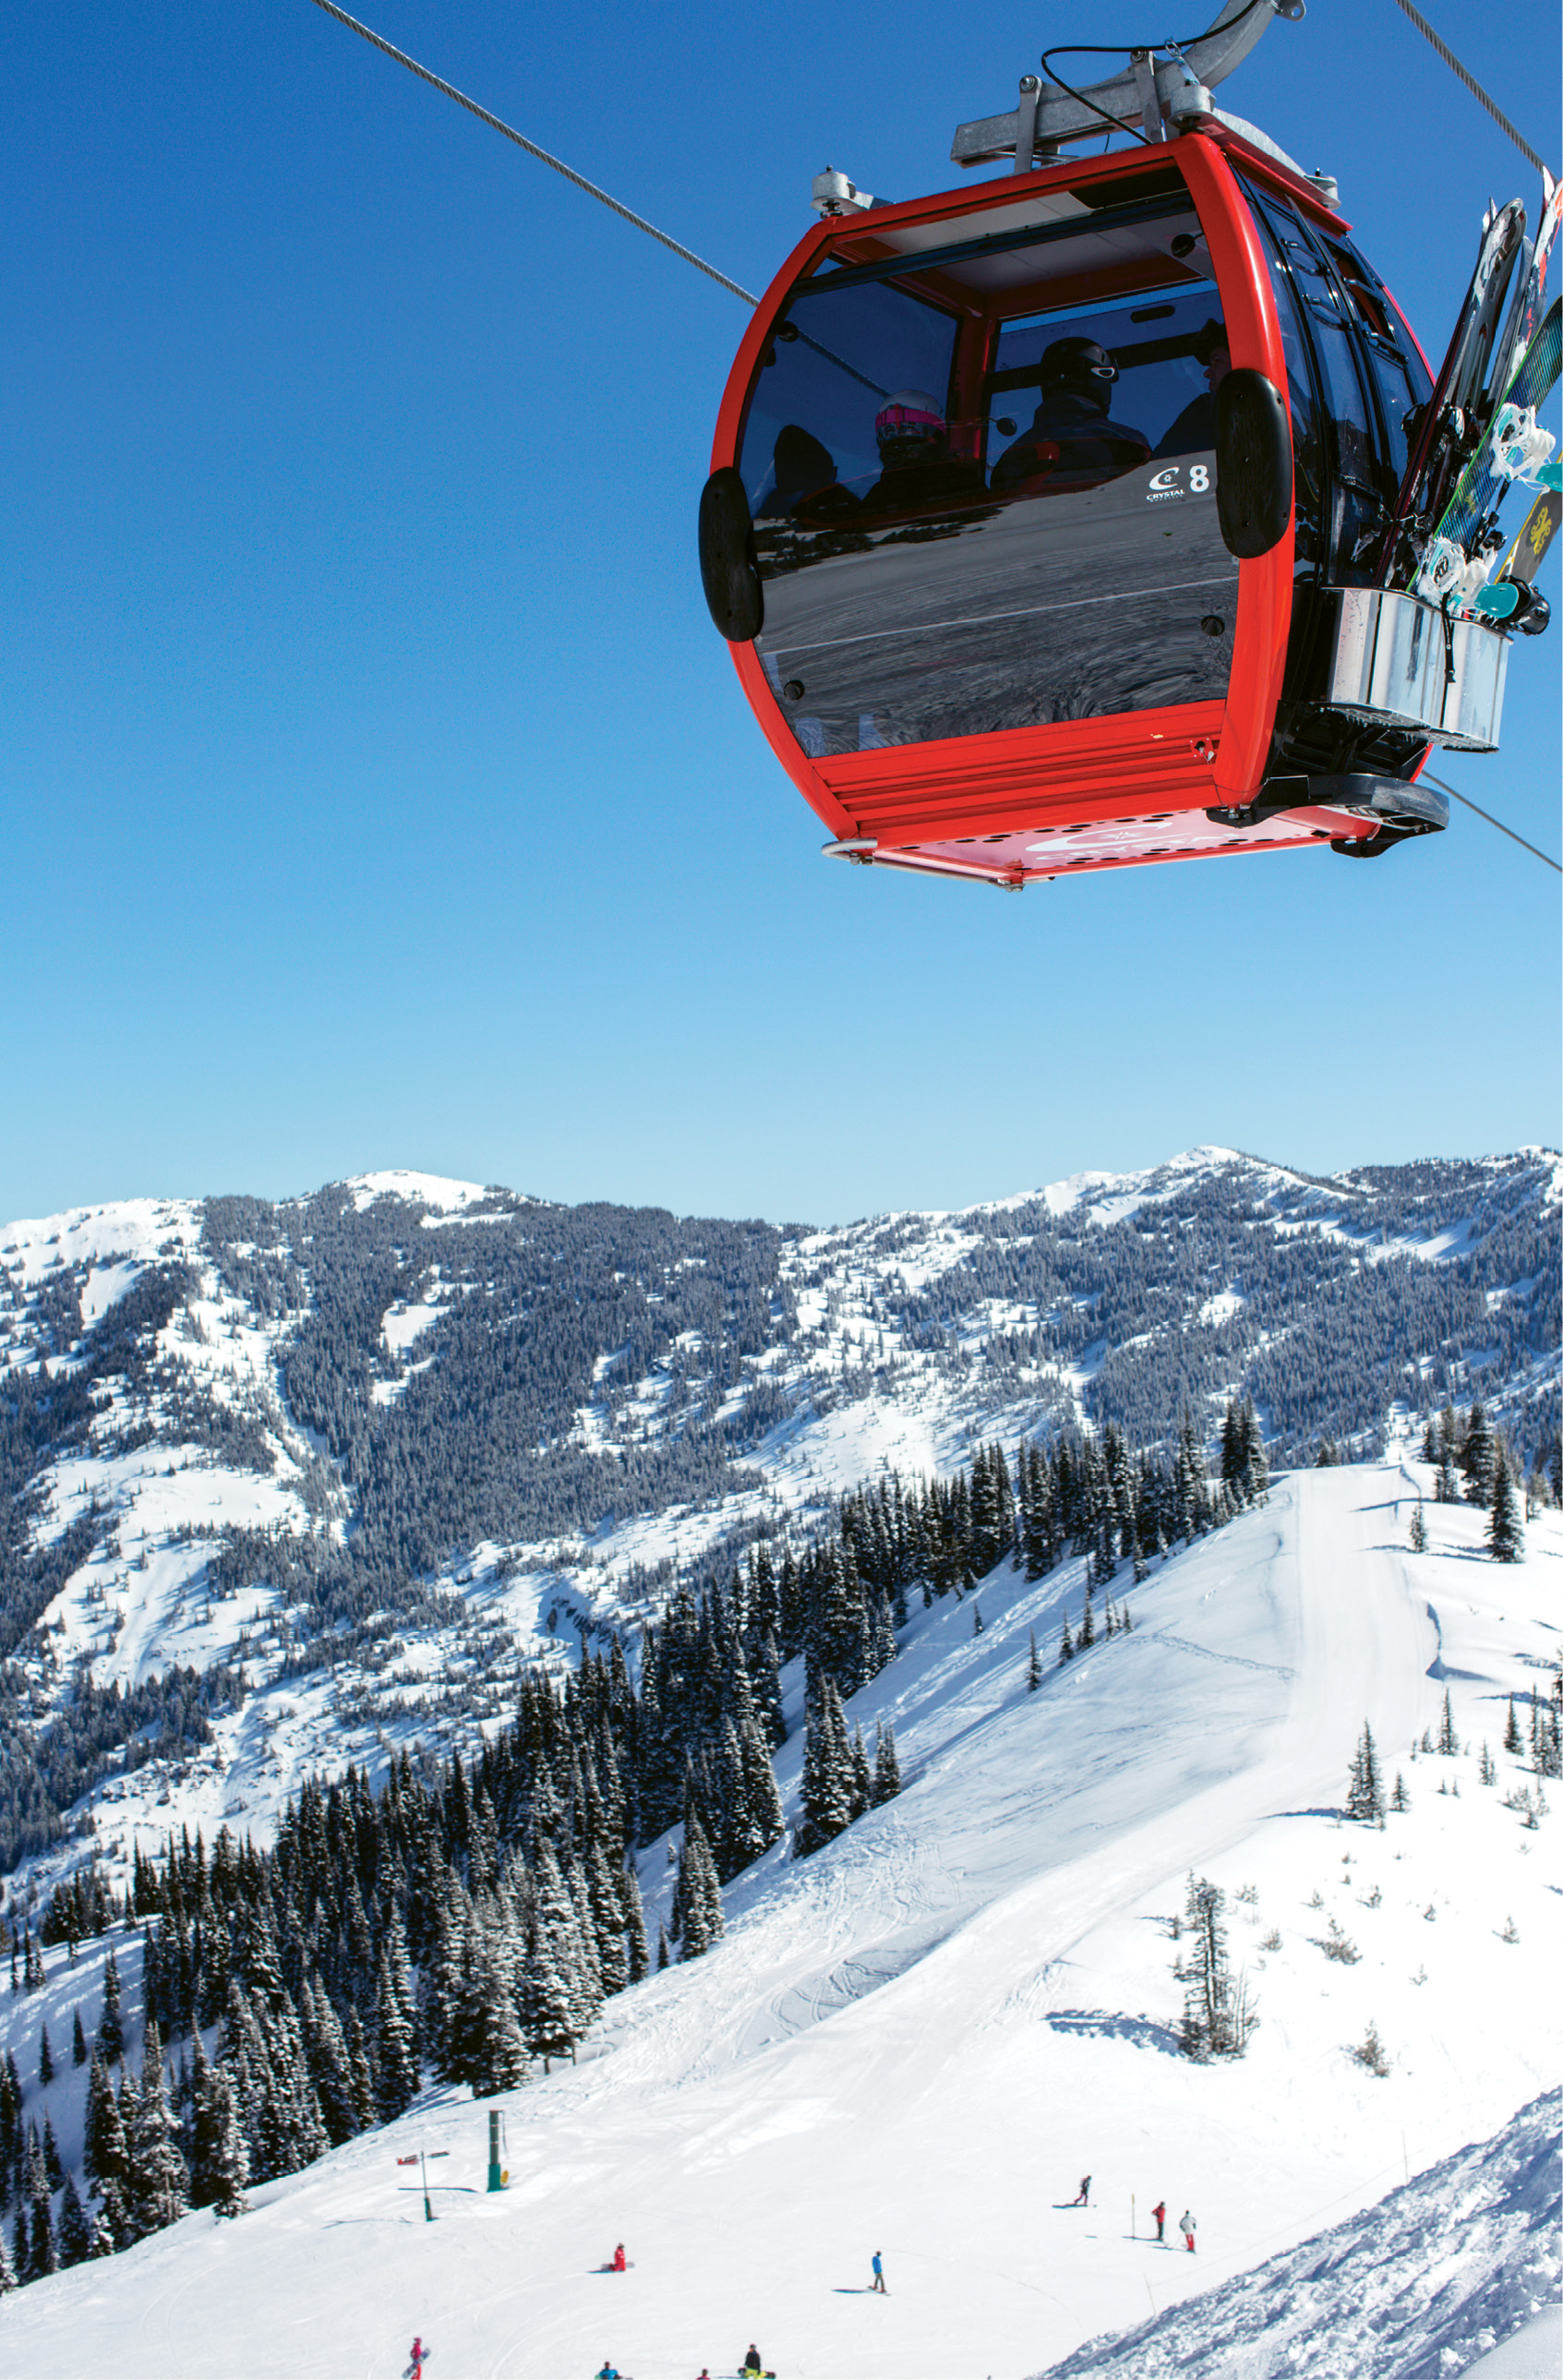 Old-School Style: The comfortable gondola is as fancy as Crystal Mountain gets. The runs are steep and thrilling, and the after-hours scene feels like stepping into the best of ski culture from a bygone era.